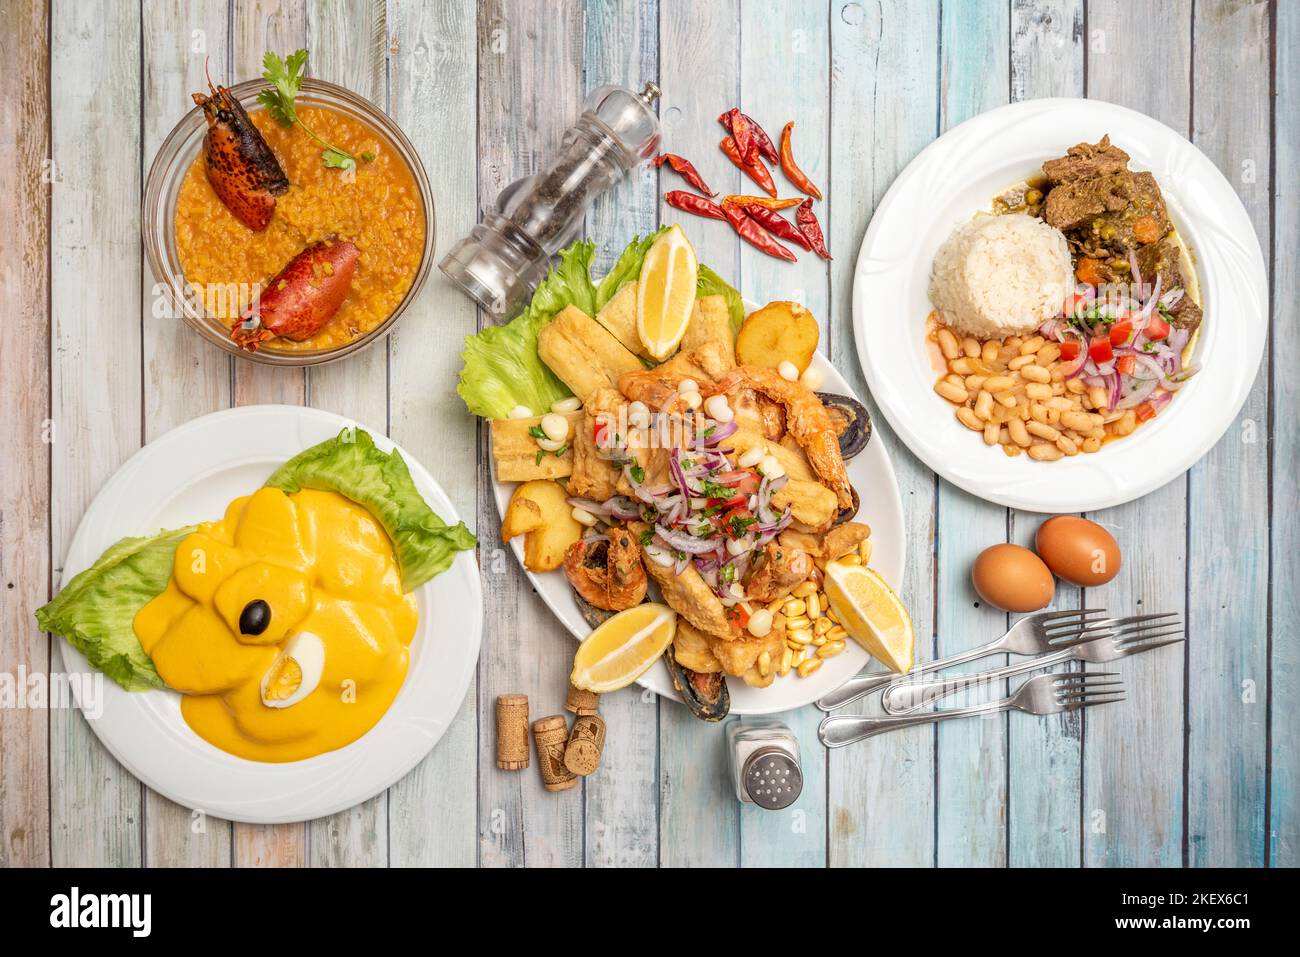 Typical dishes of Peruvian cuisine with a fish and seafood jelly, huancaina potatoes, rice with lobster, rice and meat with white beans Stock Photo